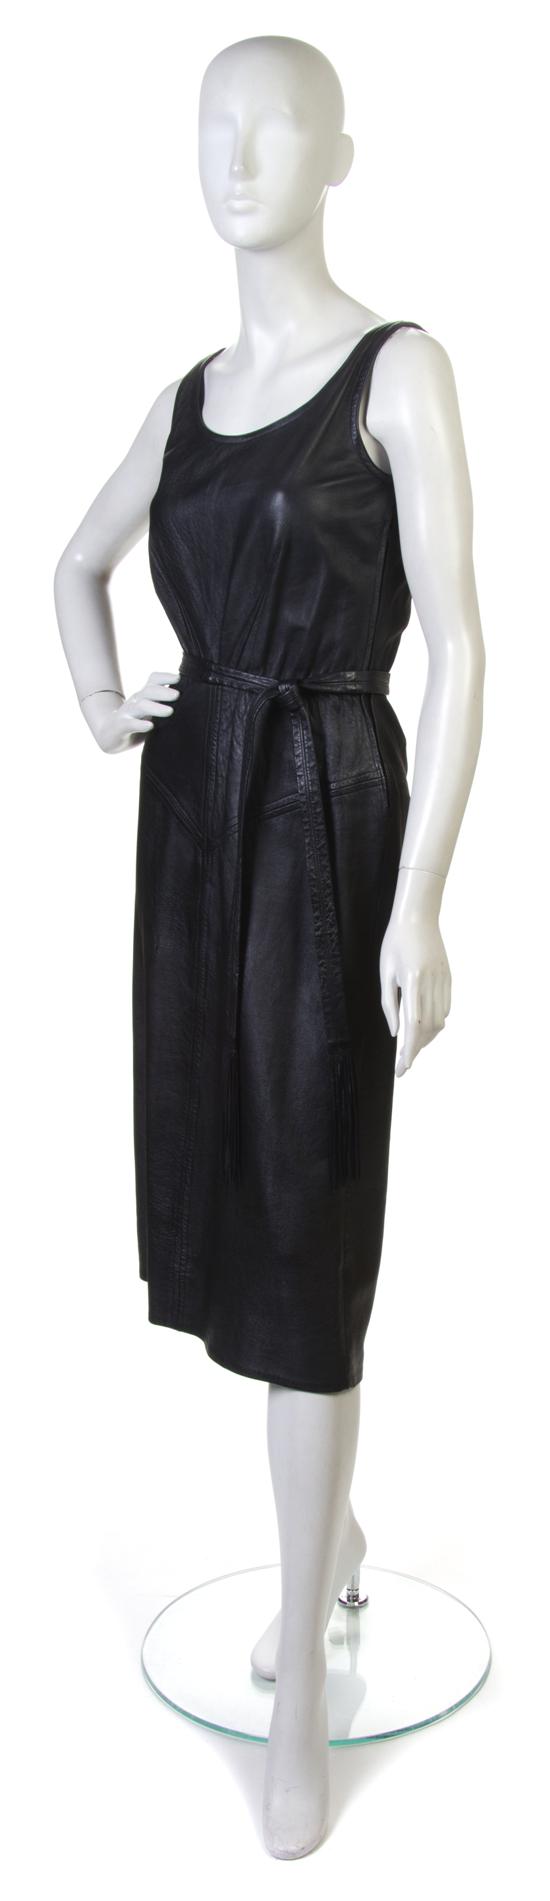 A Black Leather Dress with matching 1520b0